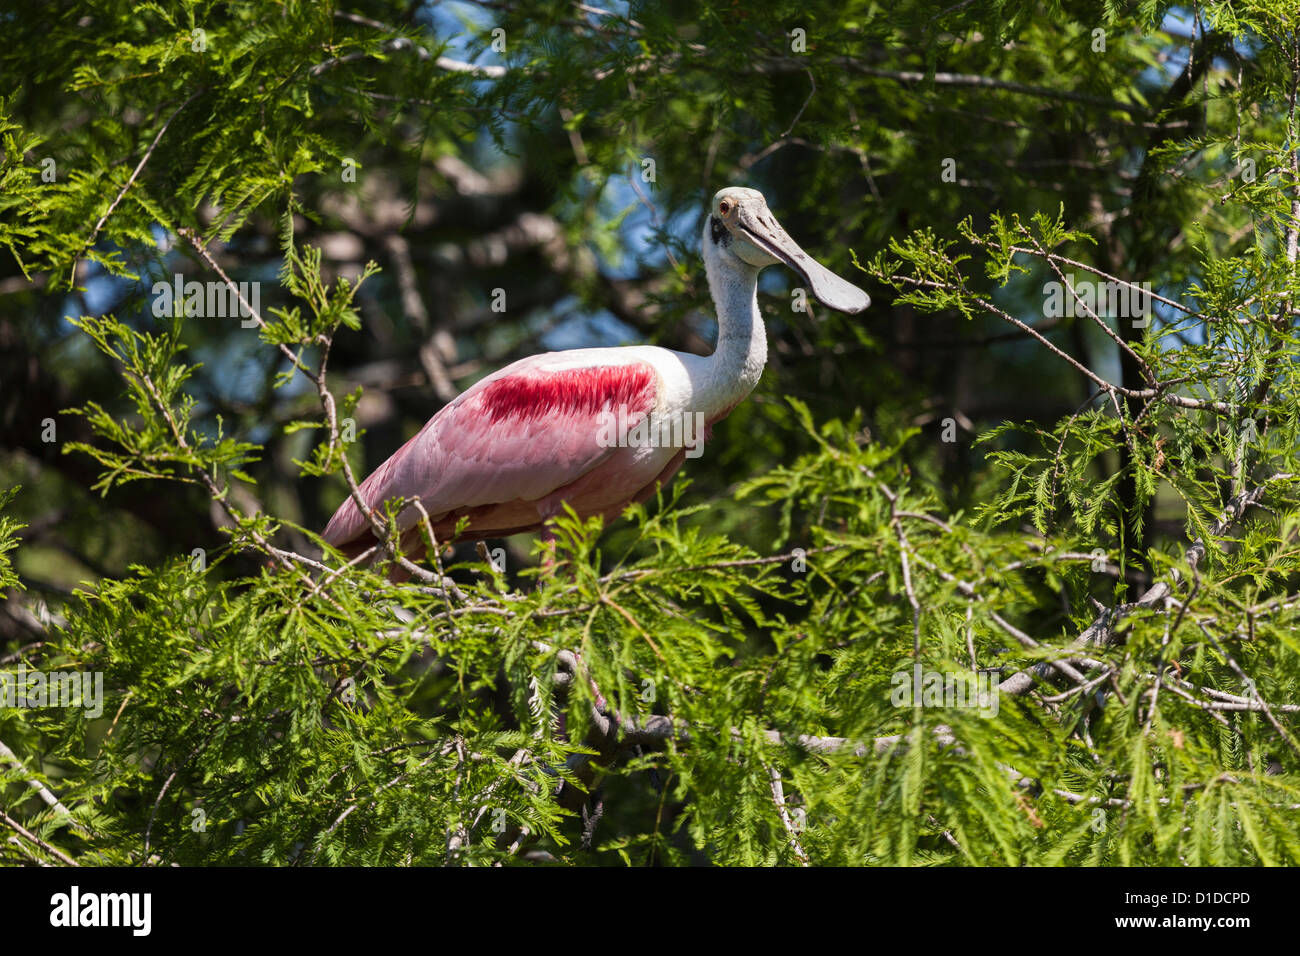 Roseate Spoonbill (Platalea ajaja) perched in tree at St. Augustine Alligator Farm Zoological Park in St. Augustine, Florida Stock Photo